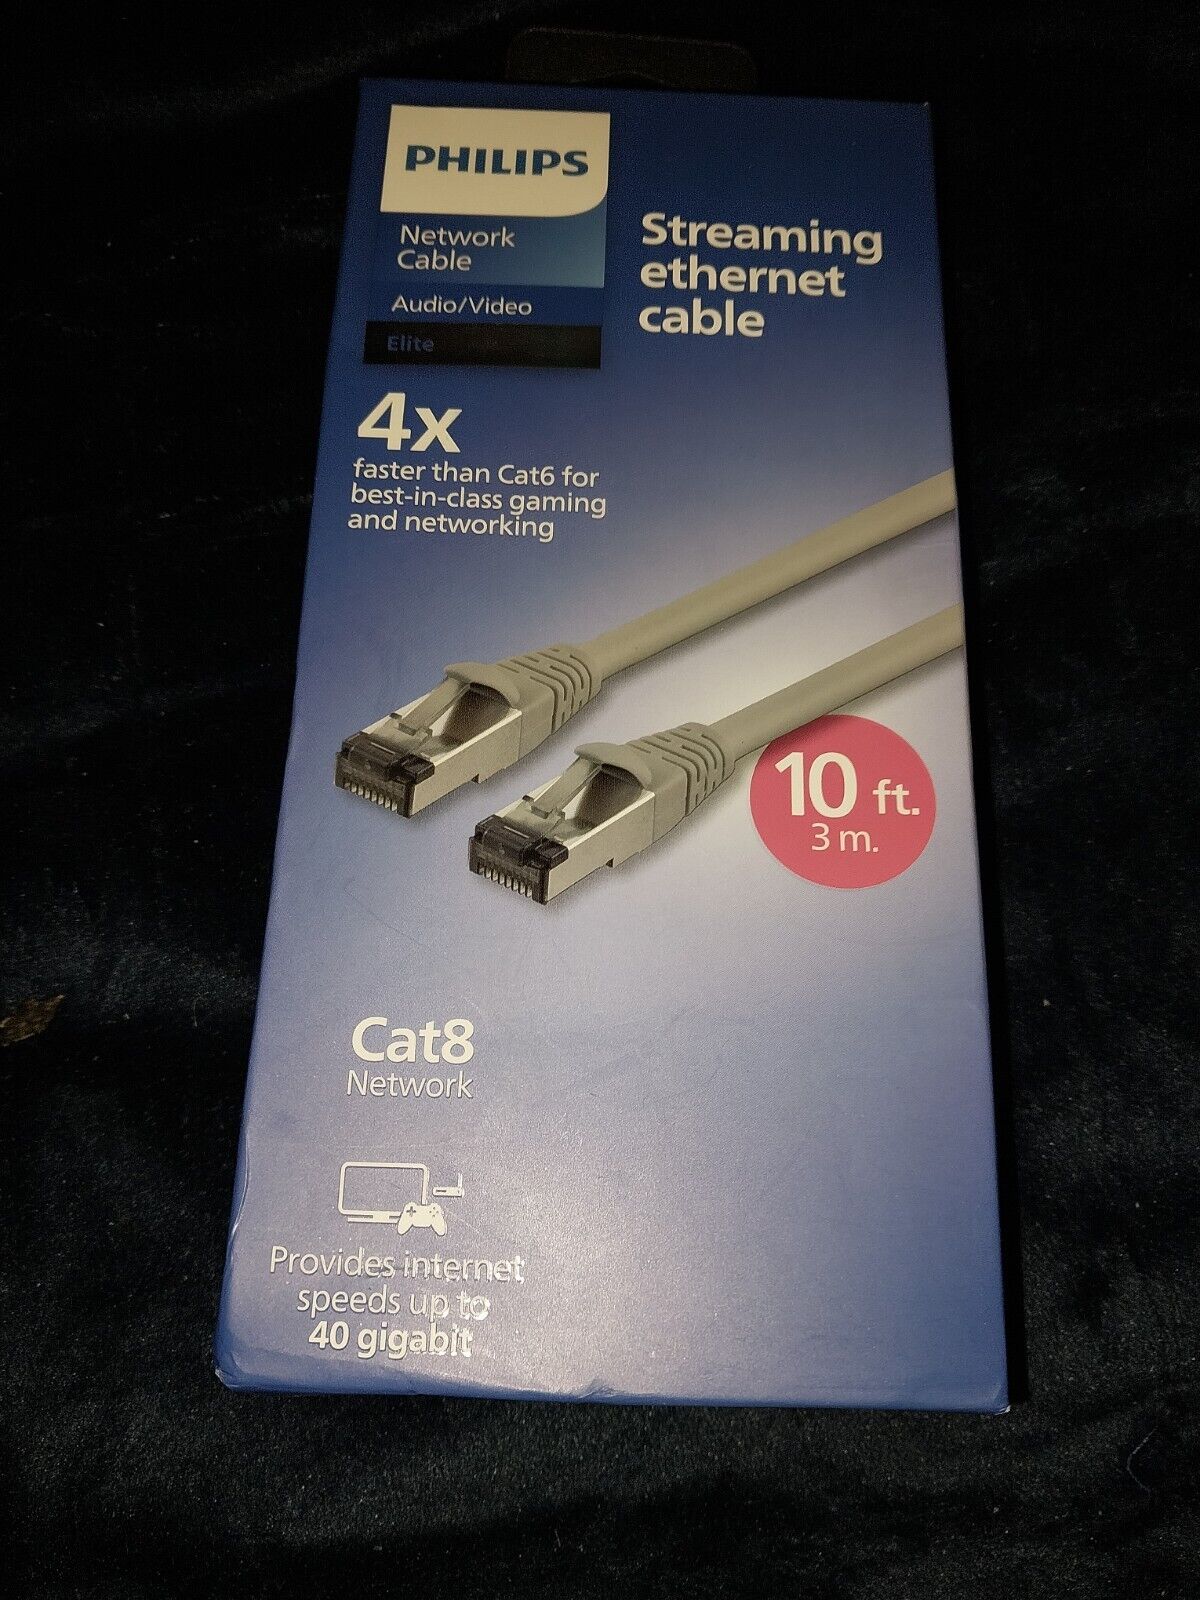 Philips 10ft Cat8 RJ45 Network Ethernet Cable 40Gbps Streaming Gaming - Gray